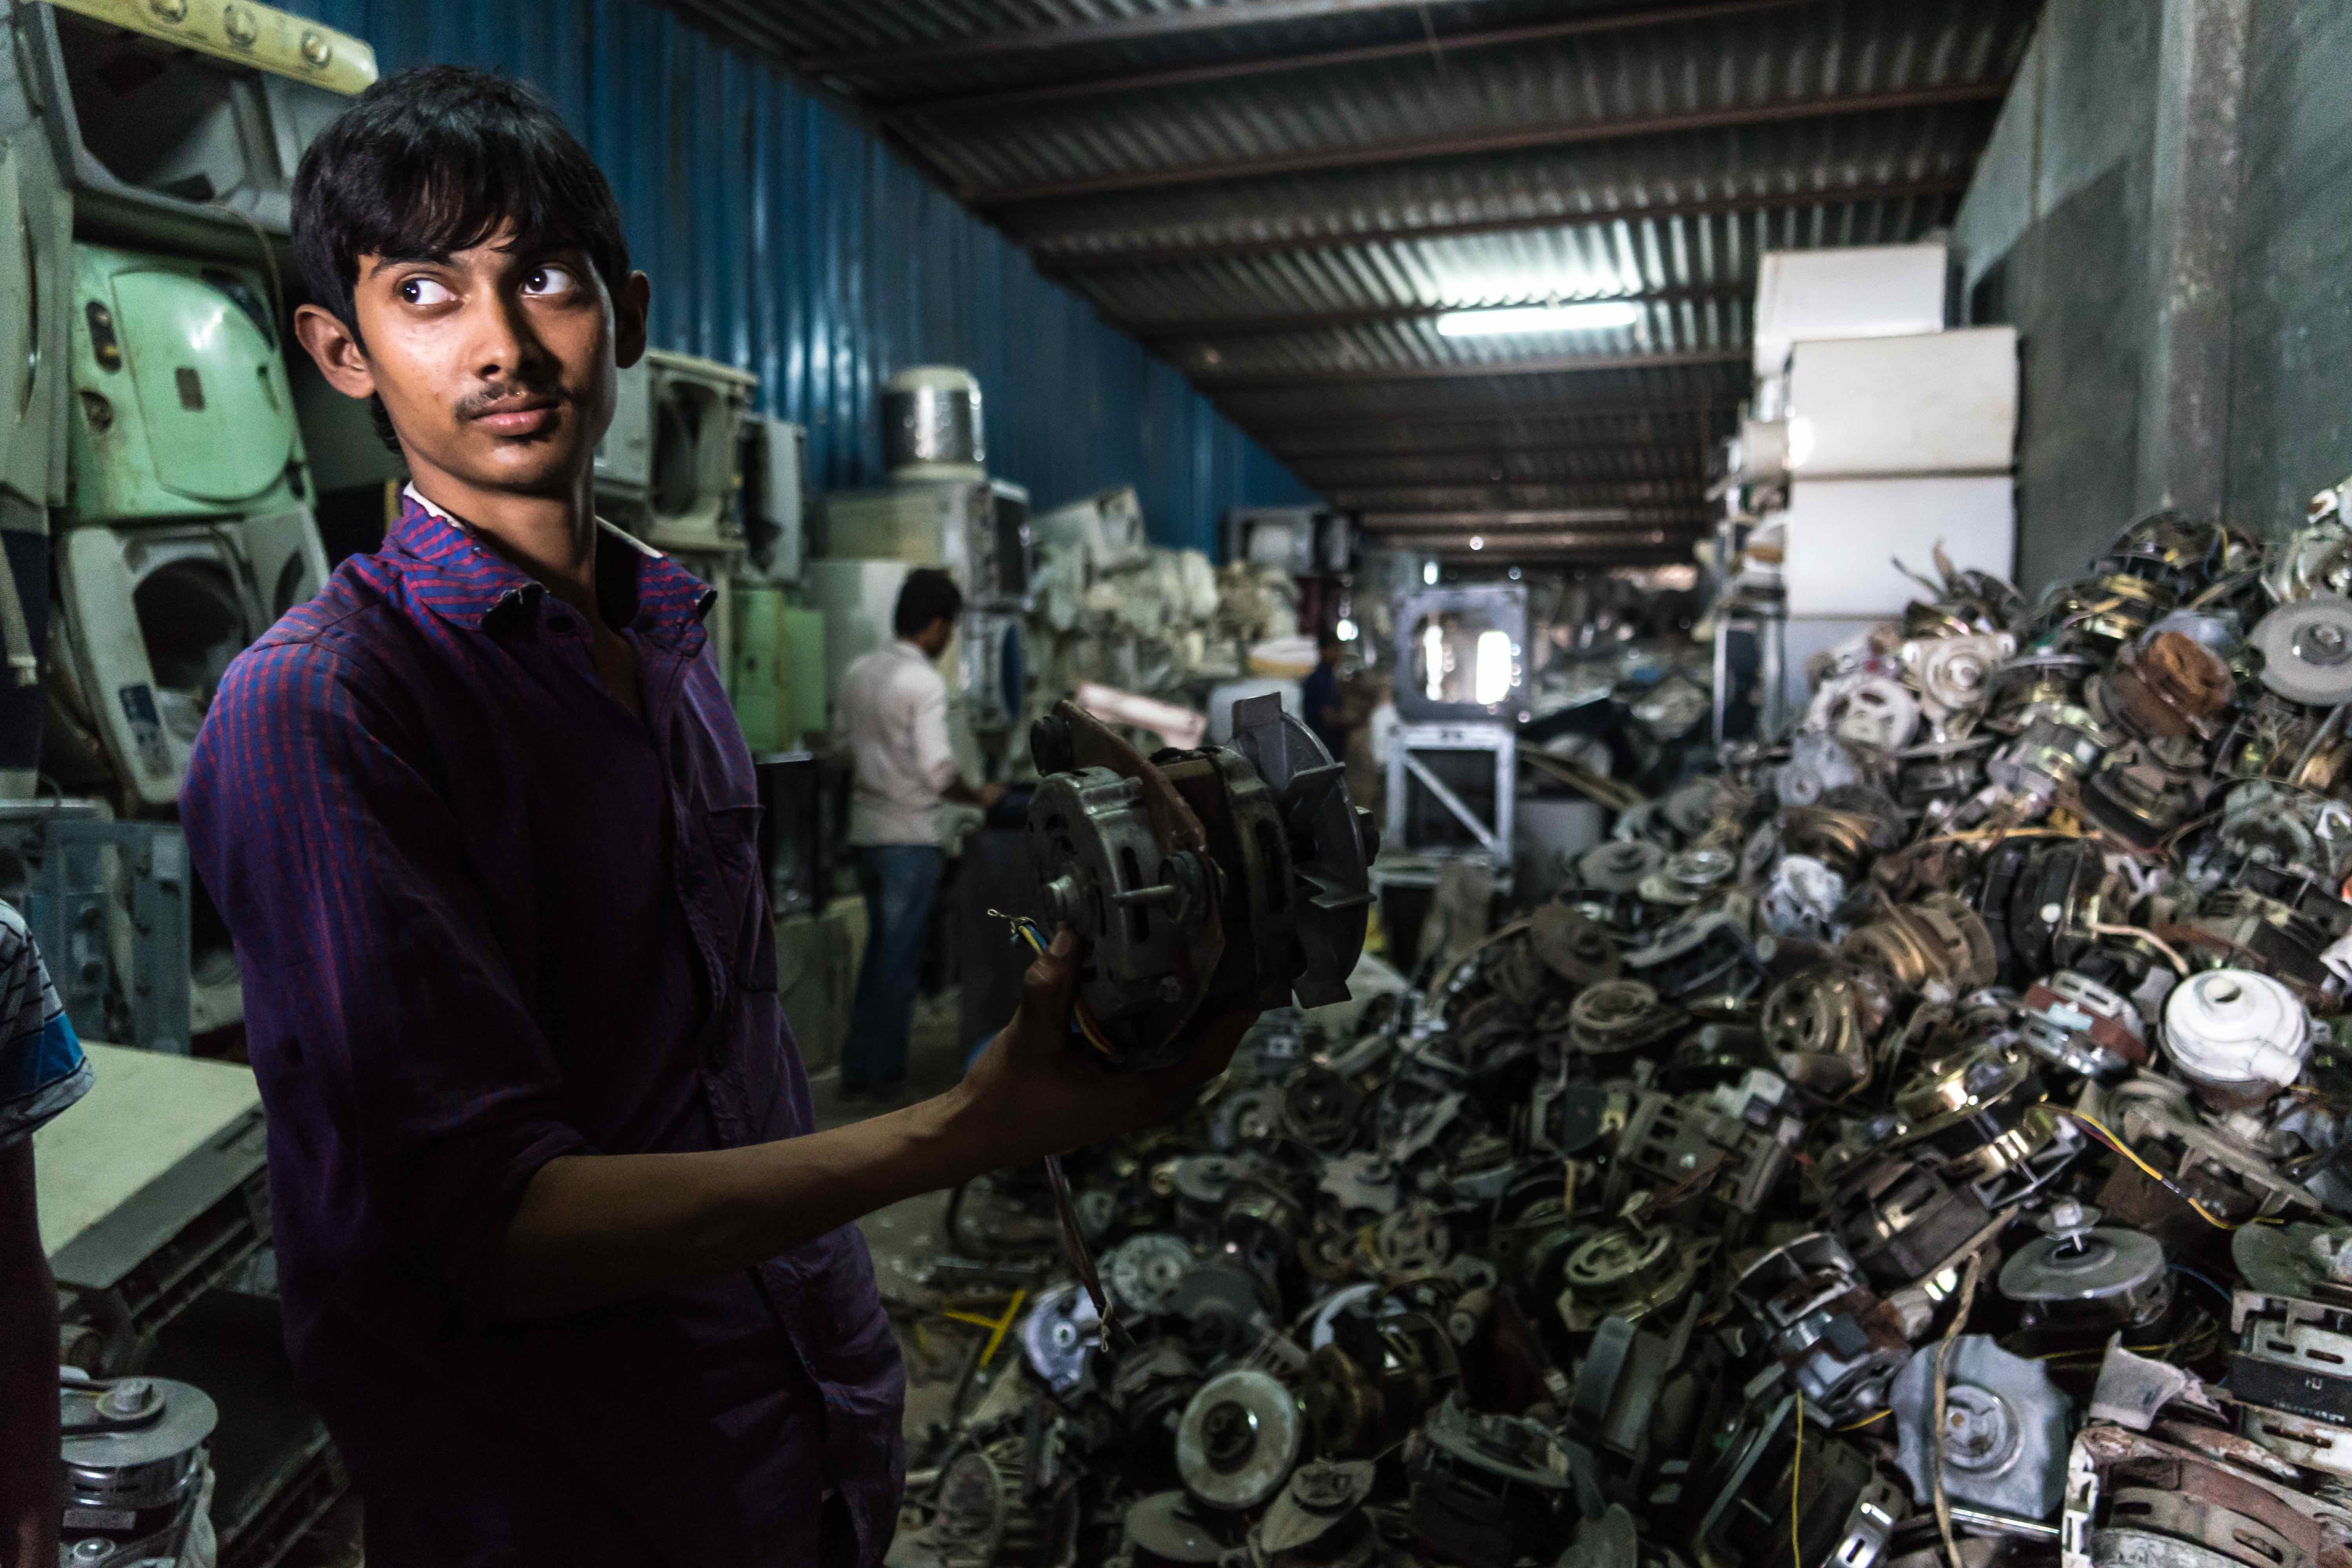 A business man who recycle copper wires from washing machine motors coming from all over India